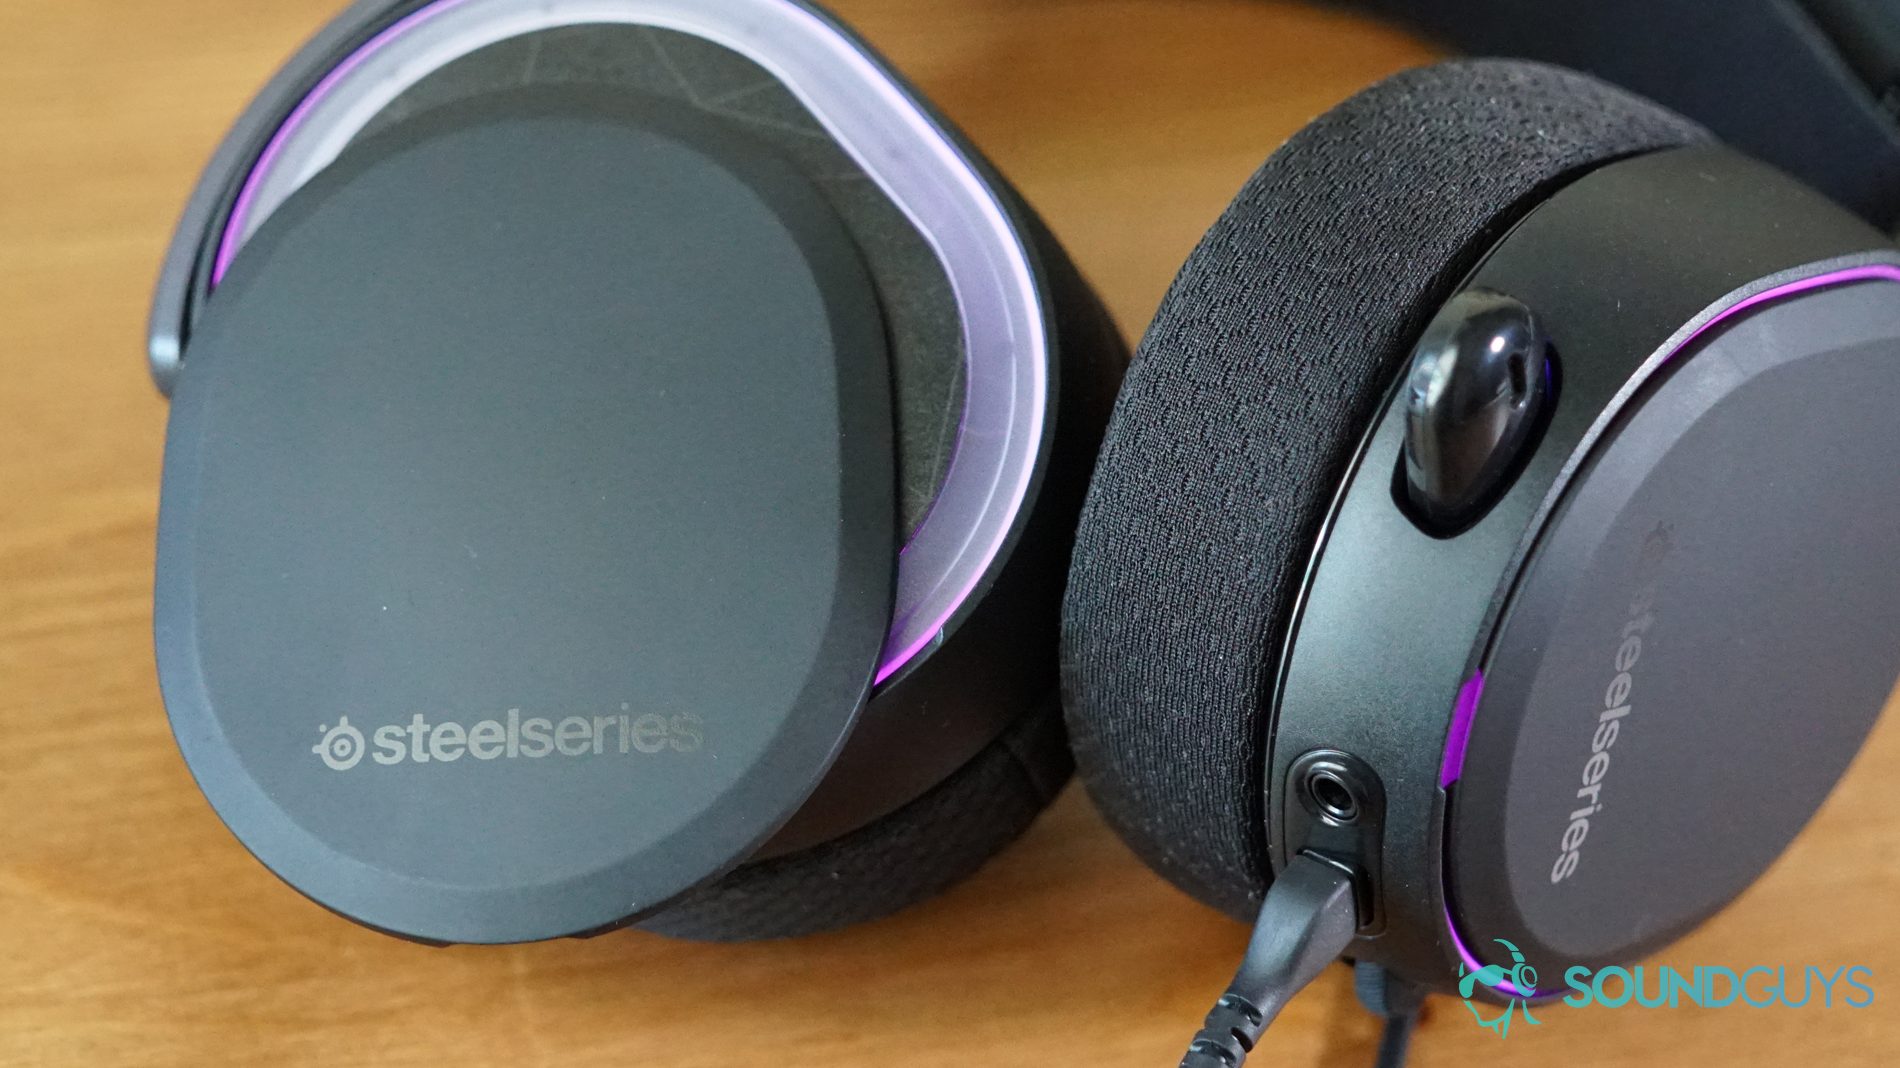 The SteelSeries Arctis Pro lays on a wooden table with its magnetic side plates detached.